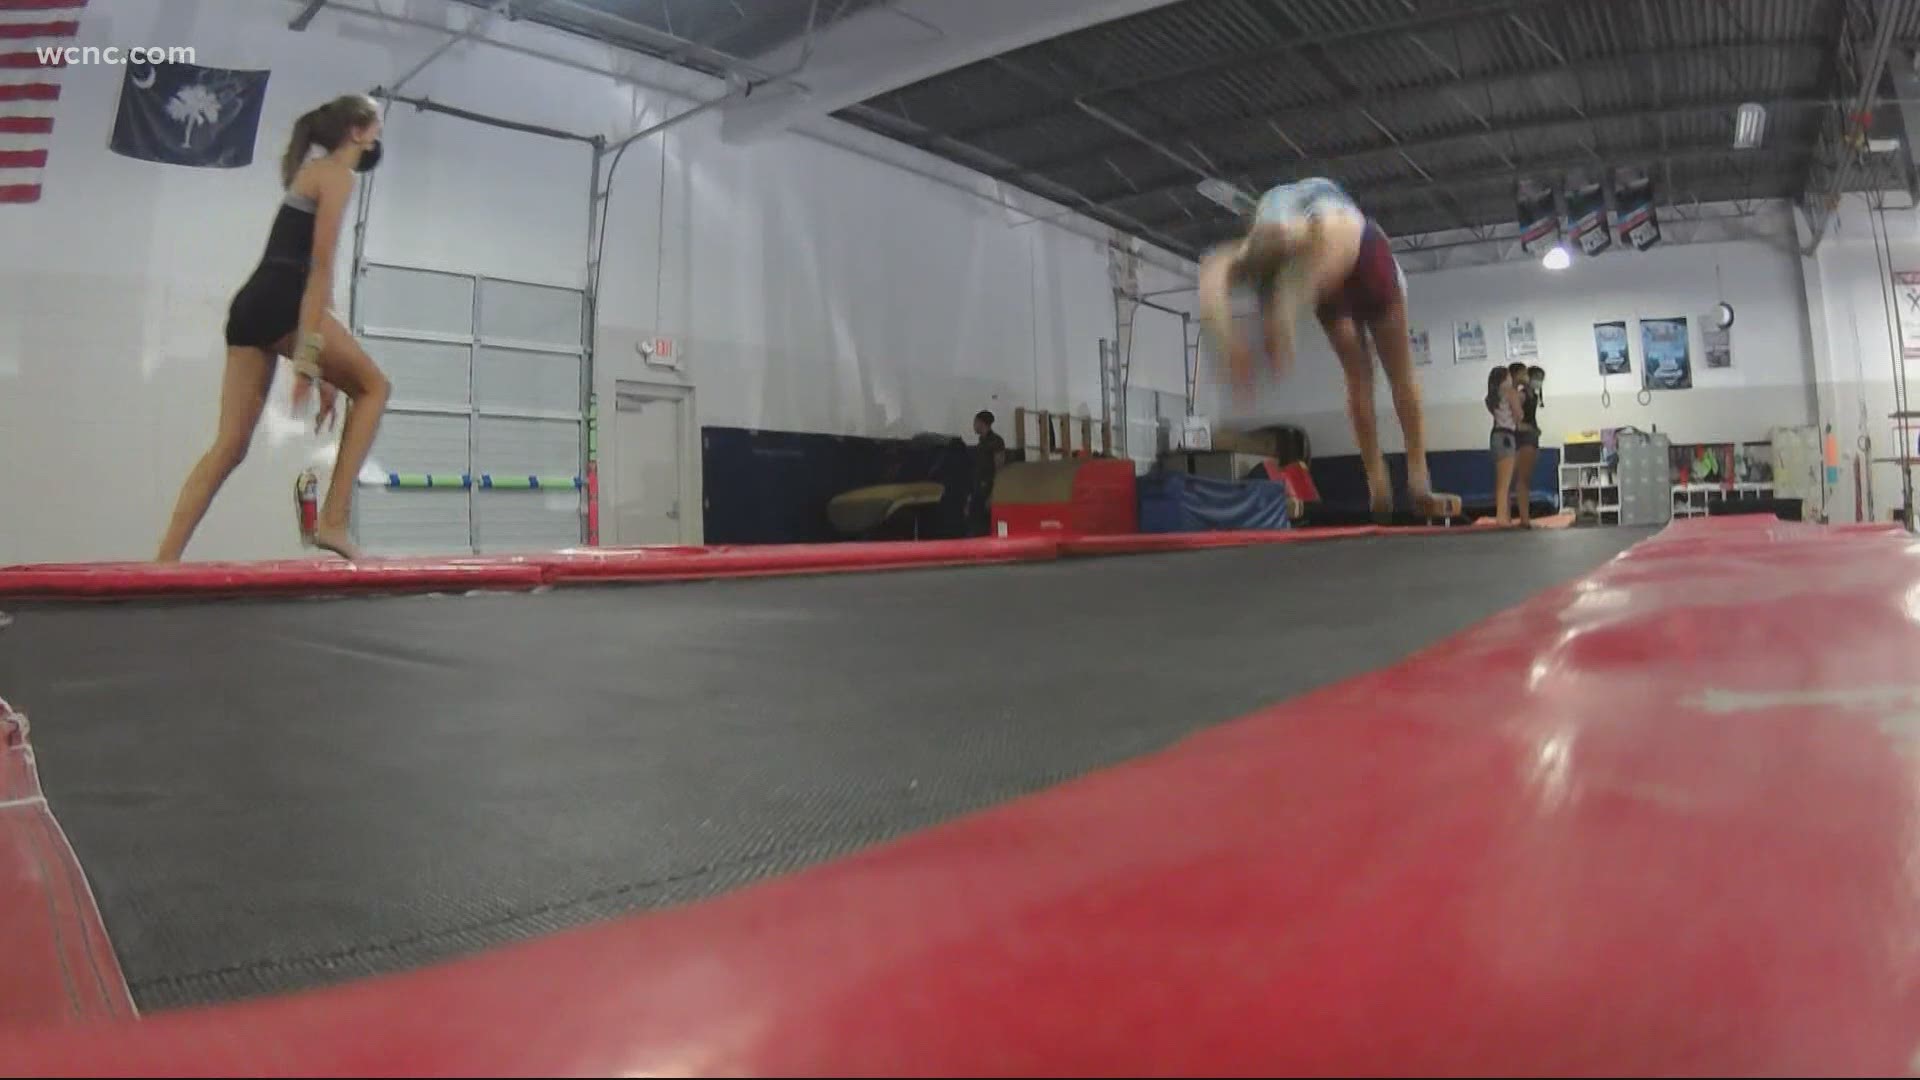 Gymnastics studios in the area are seeing a lift in enrollment from their sport being in the Olympic spotlight.